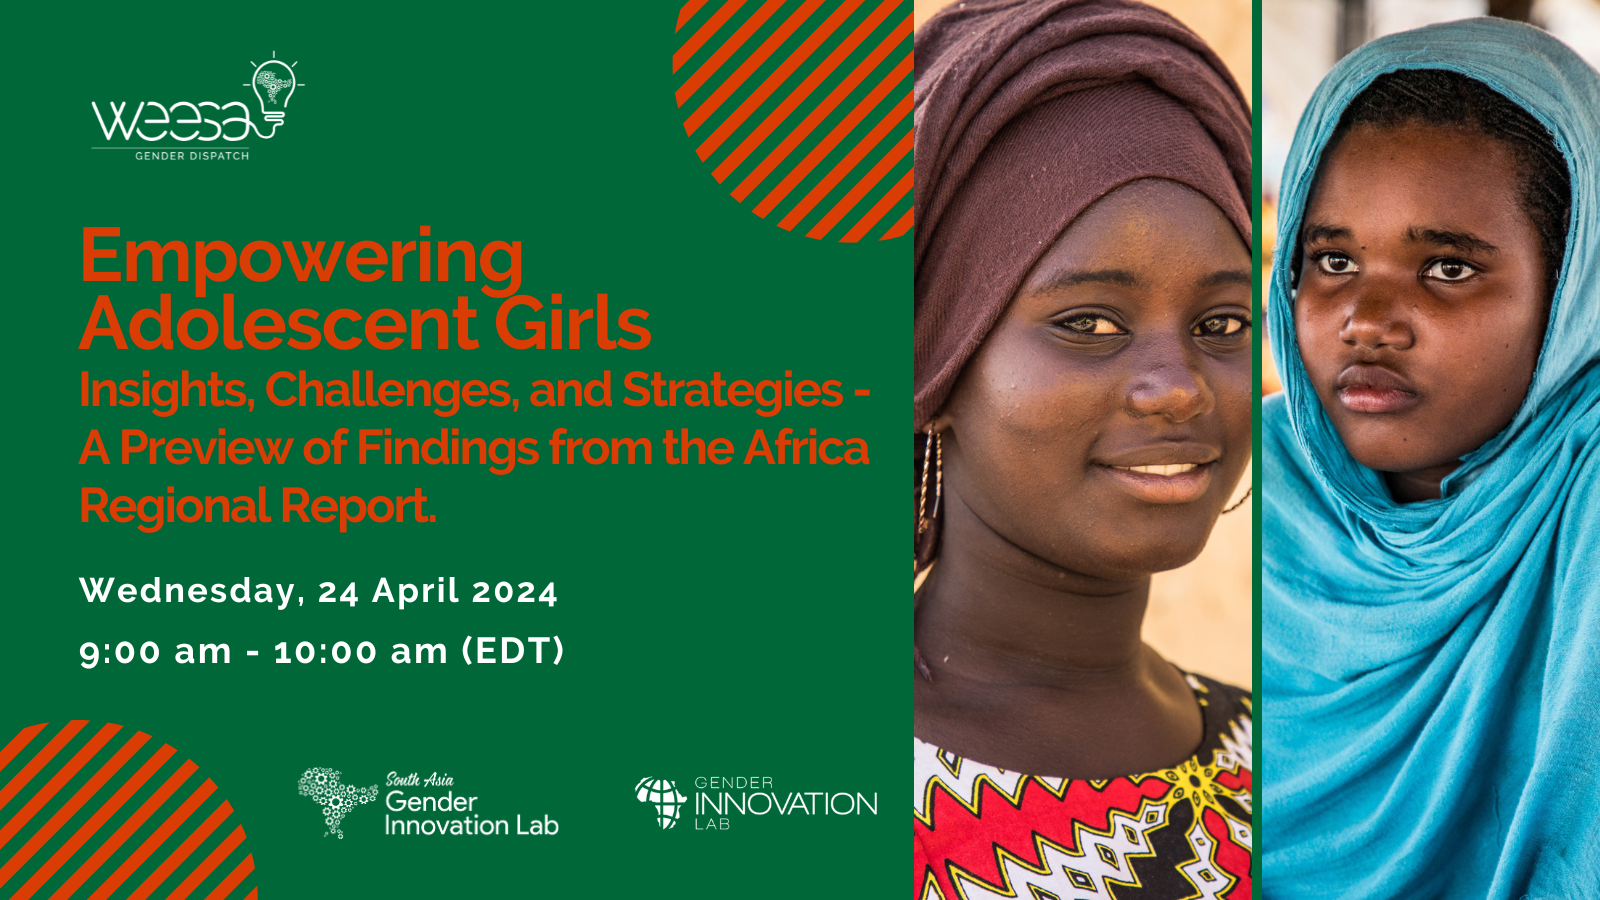 Image of two African girls with title of the webinar, date and time.